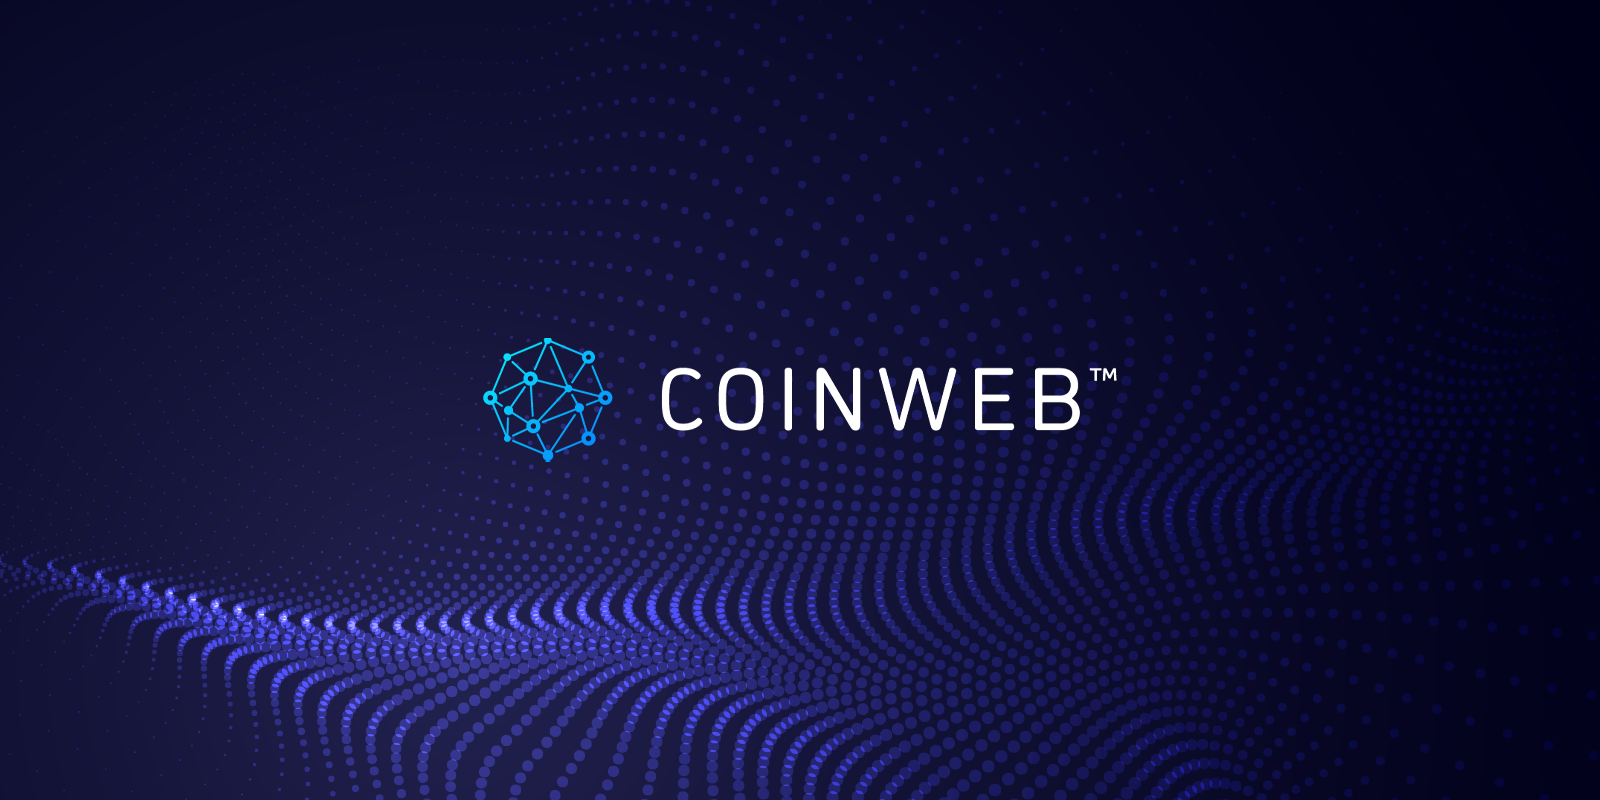 Coinweb, Wednesday, December 1, 2021, Press release picture